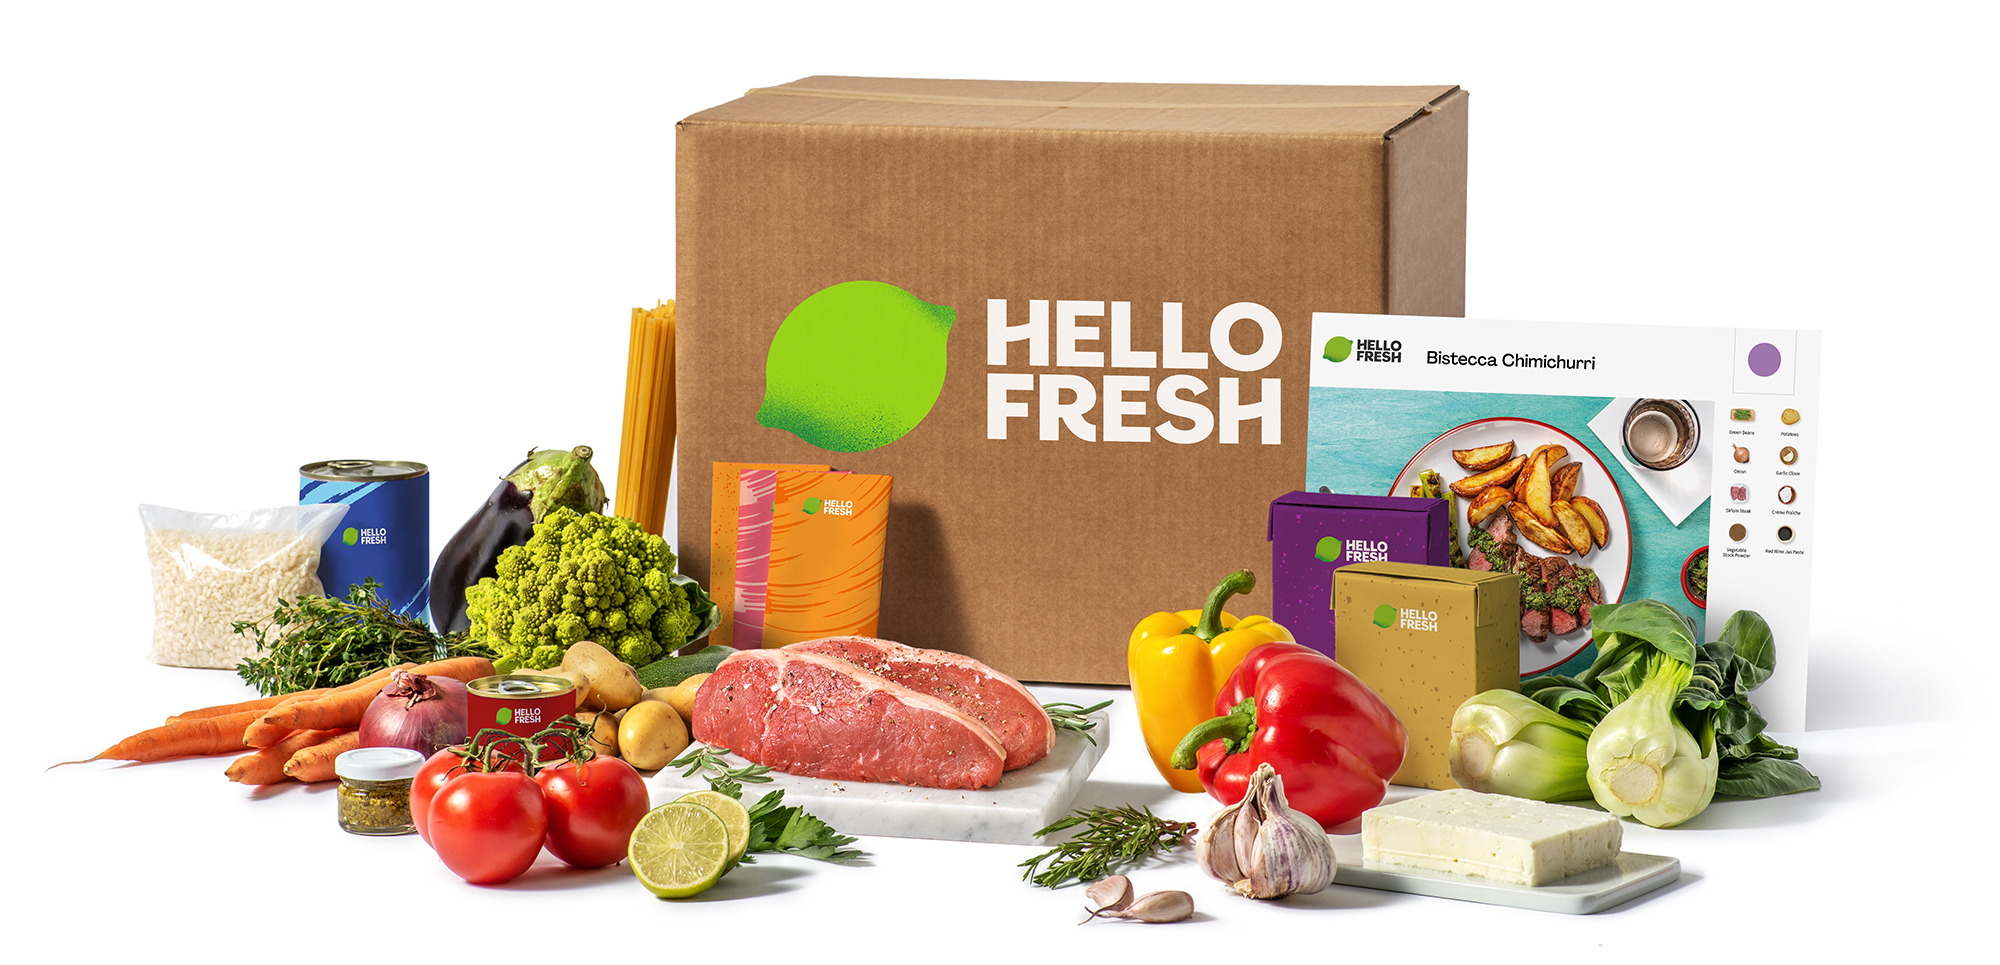 HelloFresh Launches in Italy | Business Wire